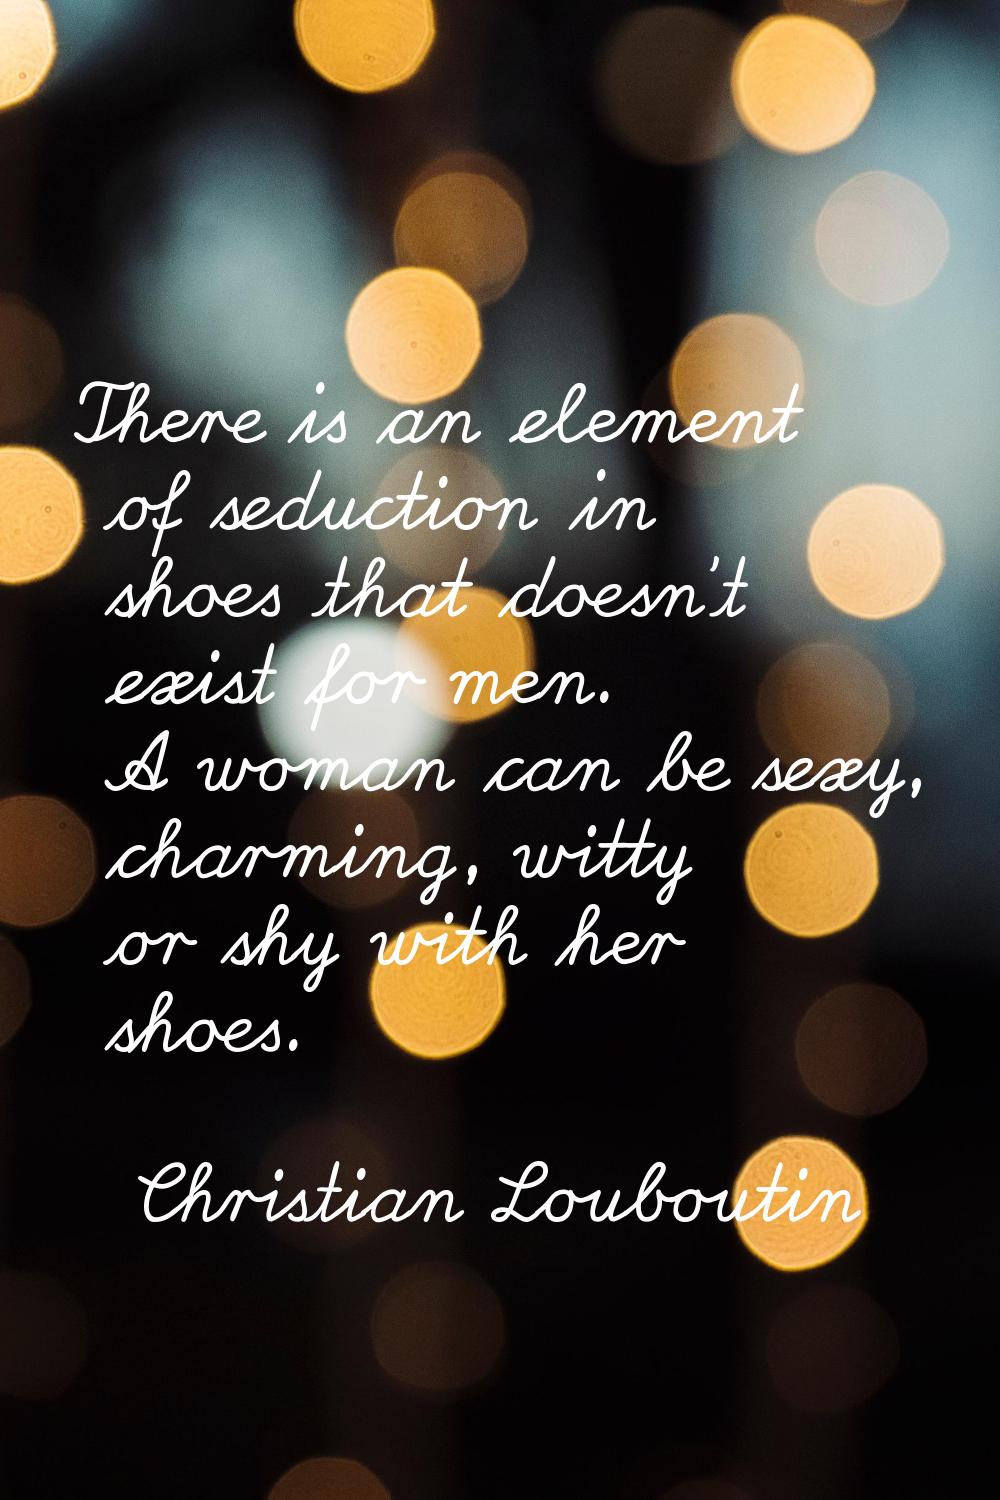 There is an element of seduction in shoes that doesn't exist for men. A woman can be sexy, charming